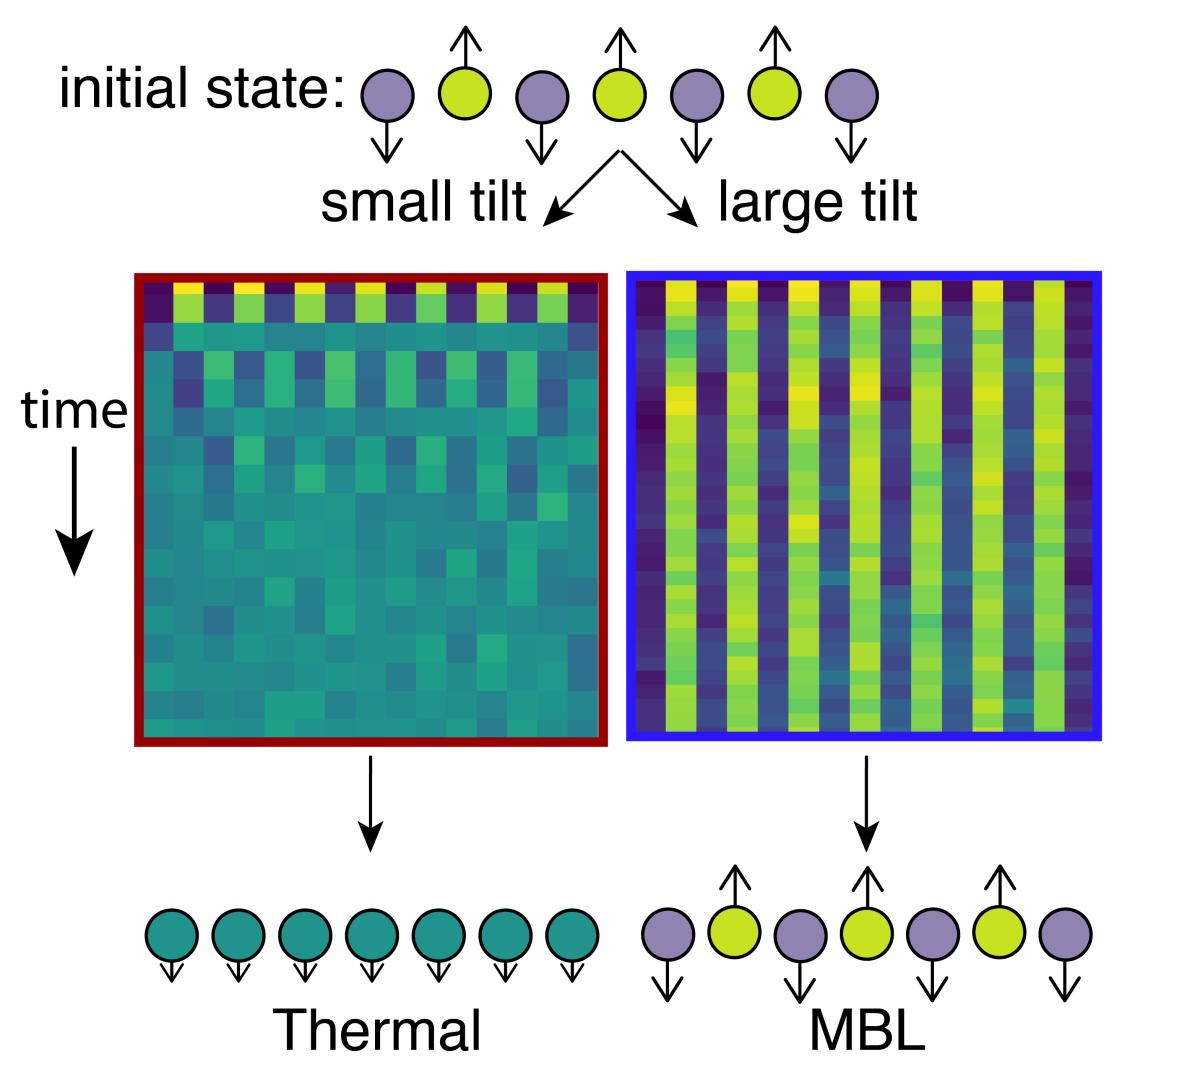 Normally, ion spins that start out pointing in opposite directions will interact and reach an equilibrium, with no trace of where they started. But when the tilt in their container is large enough, they keep pointing in their original direction, creating a many-body localized state that remembers its initial configuration. (Credit: Adapted from article by the authors/JQI)